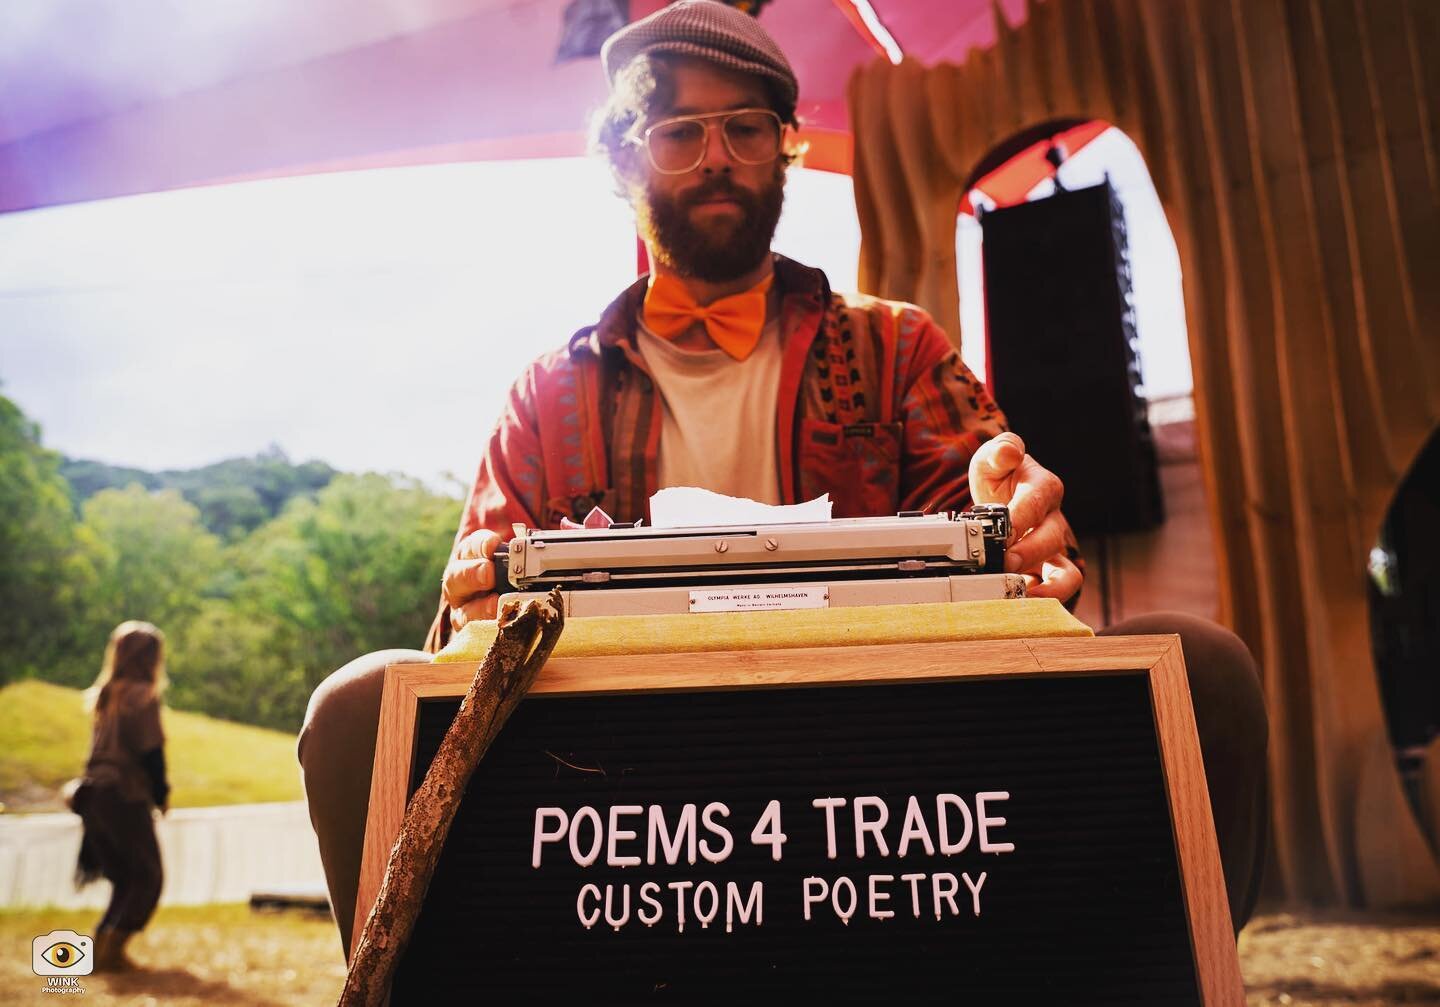 *Tap tap tap CHING*
&bull;
@dragon_dreaming_festival 
#typewriter #poetry #dappa #bowtie #poem #freestyle